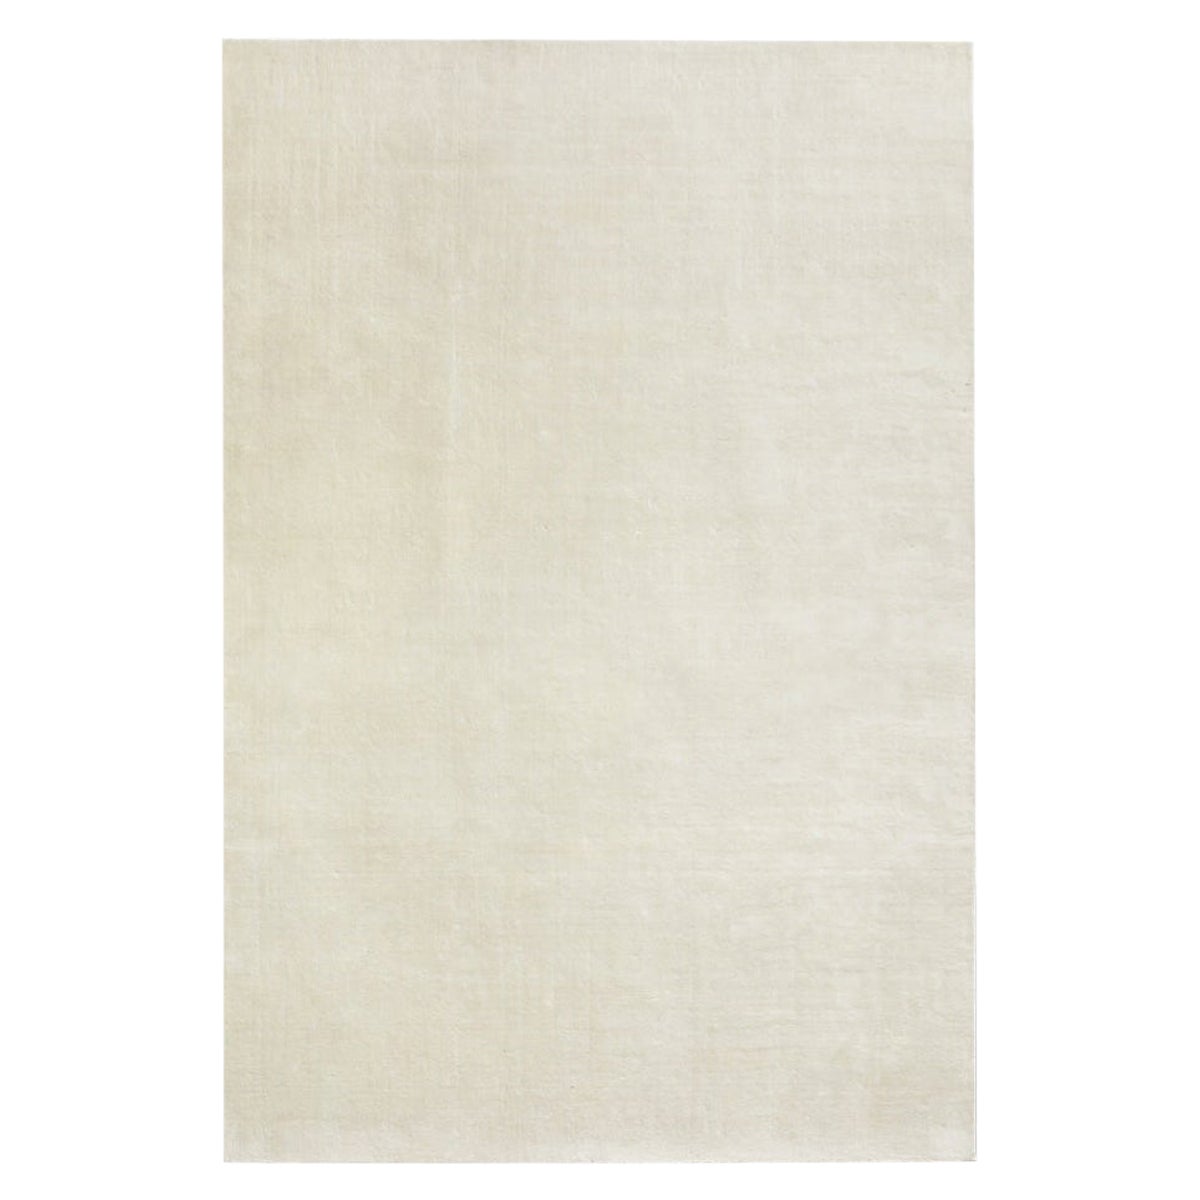 Grand Dusty White, Wool Cut Pile Rug For Sale